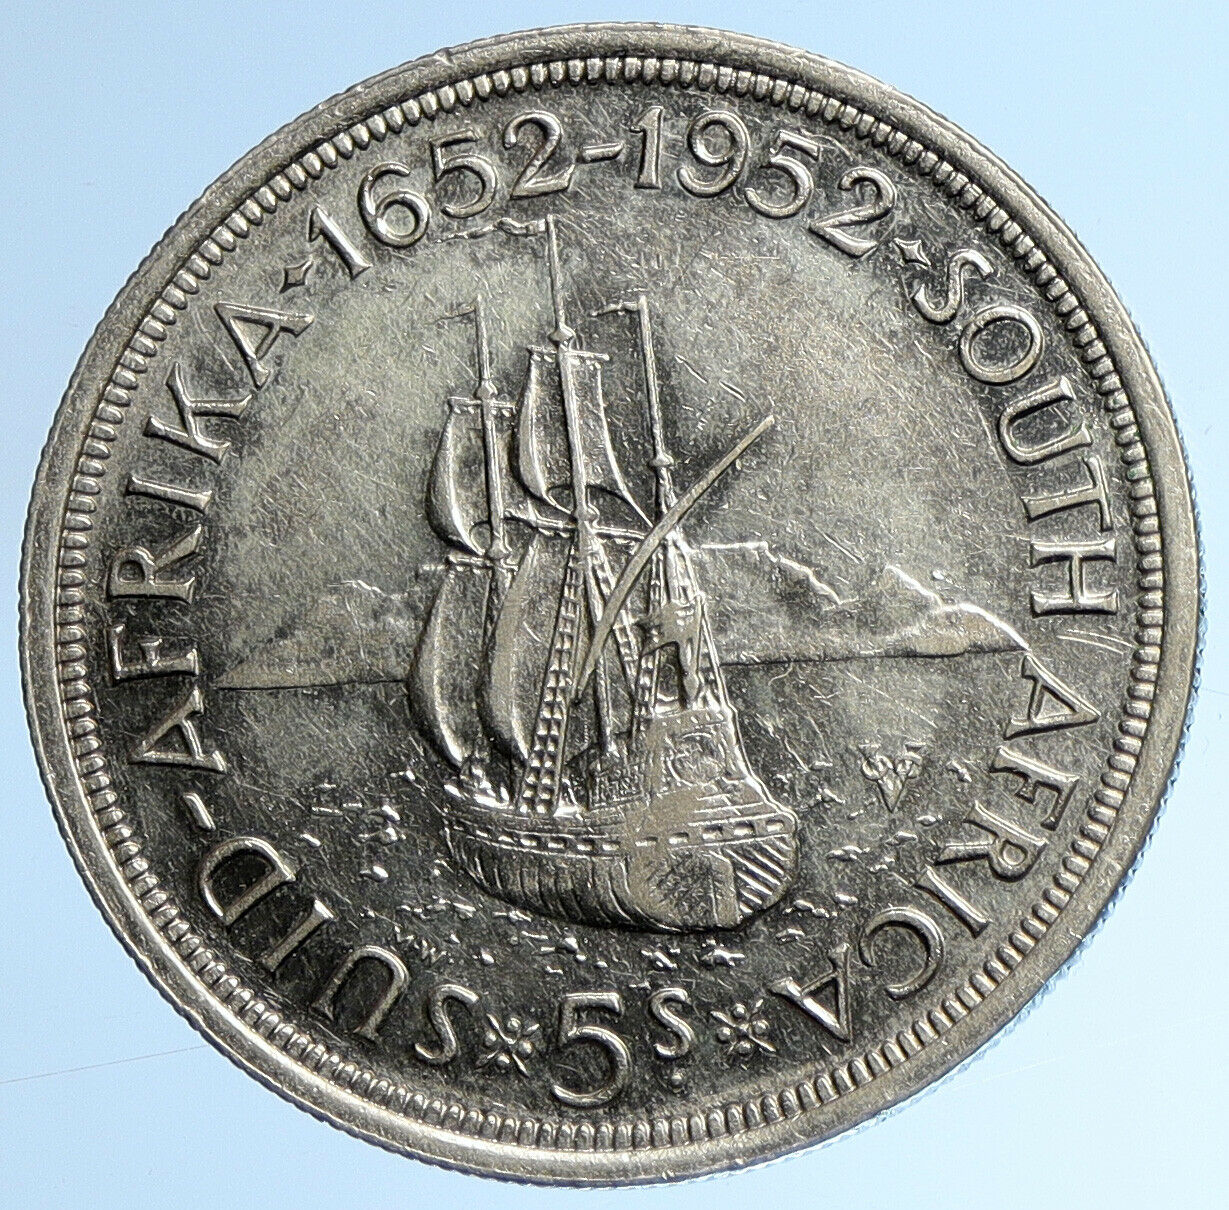 1952 SOUTH AFRICA George VI 300th Cape Town SHIP Silver 5 Shillings Coin i109615